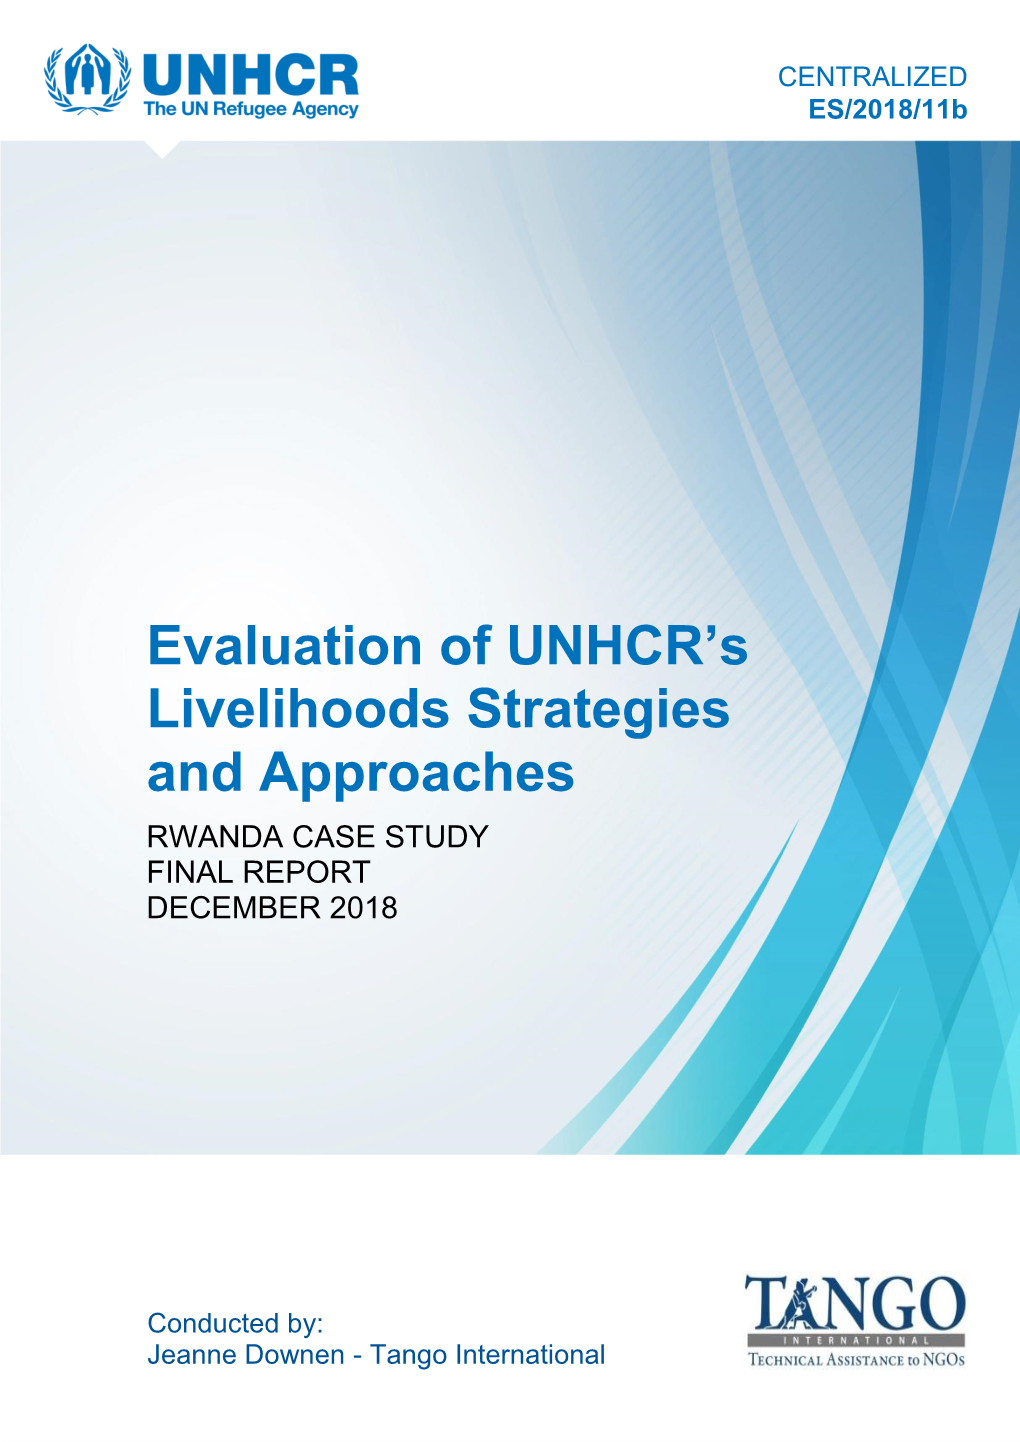 Evaluation of UNHCR's Livelihoods Strategies and Approaches